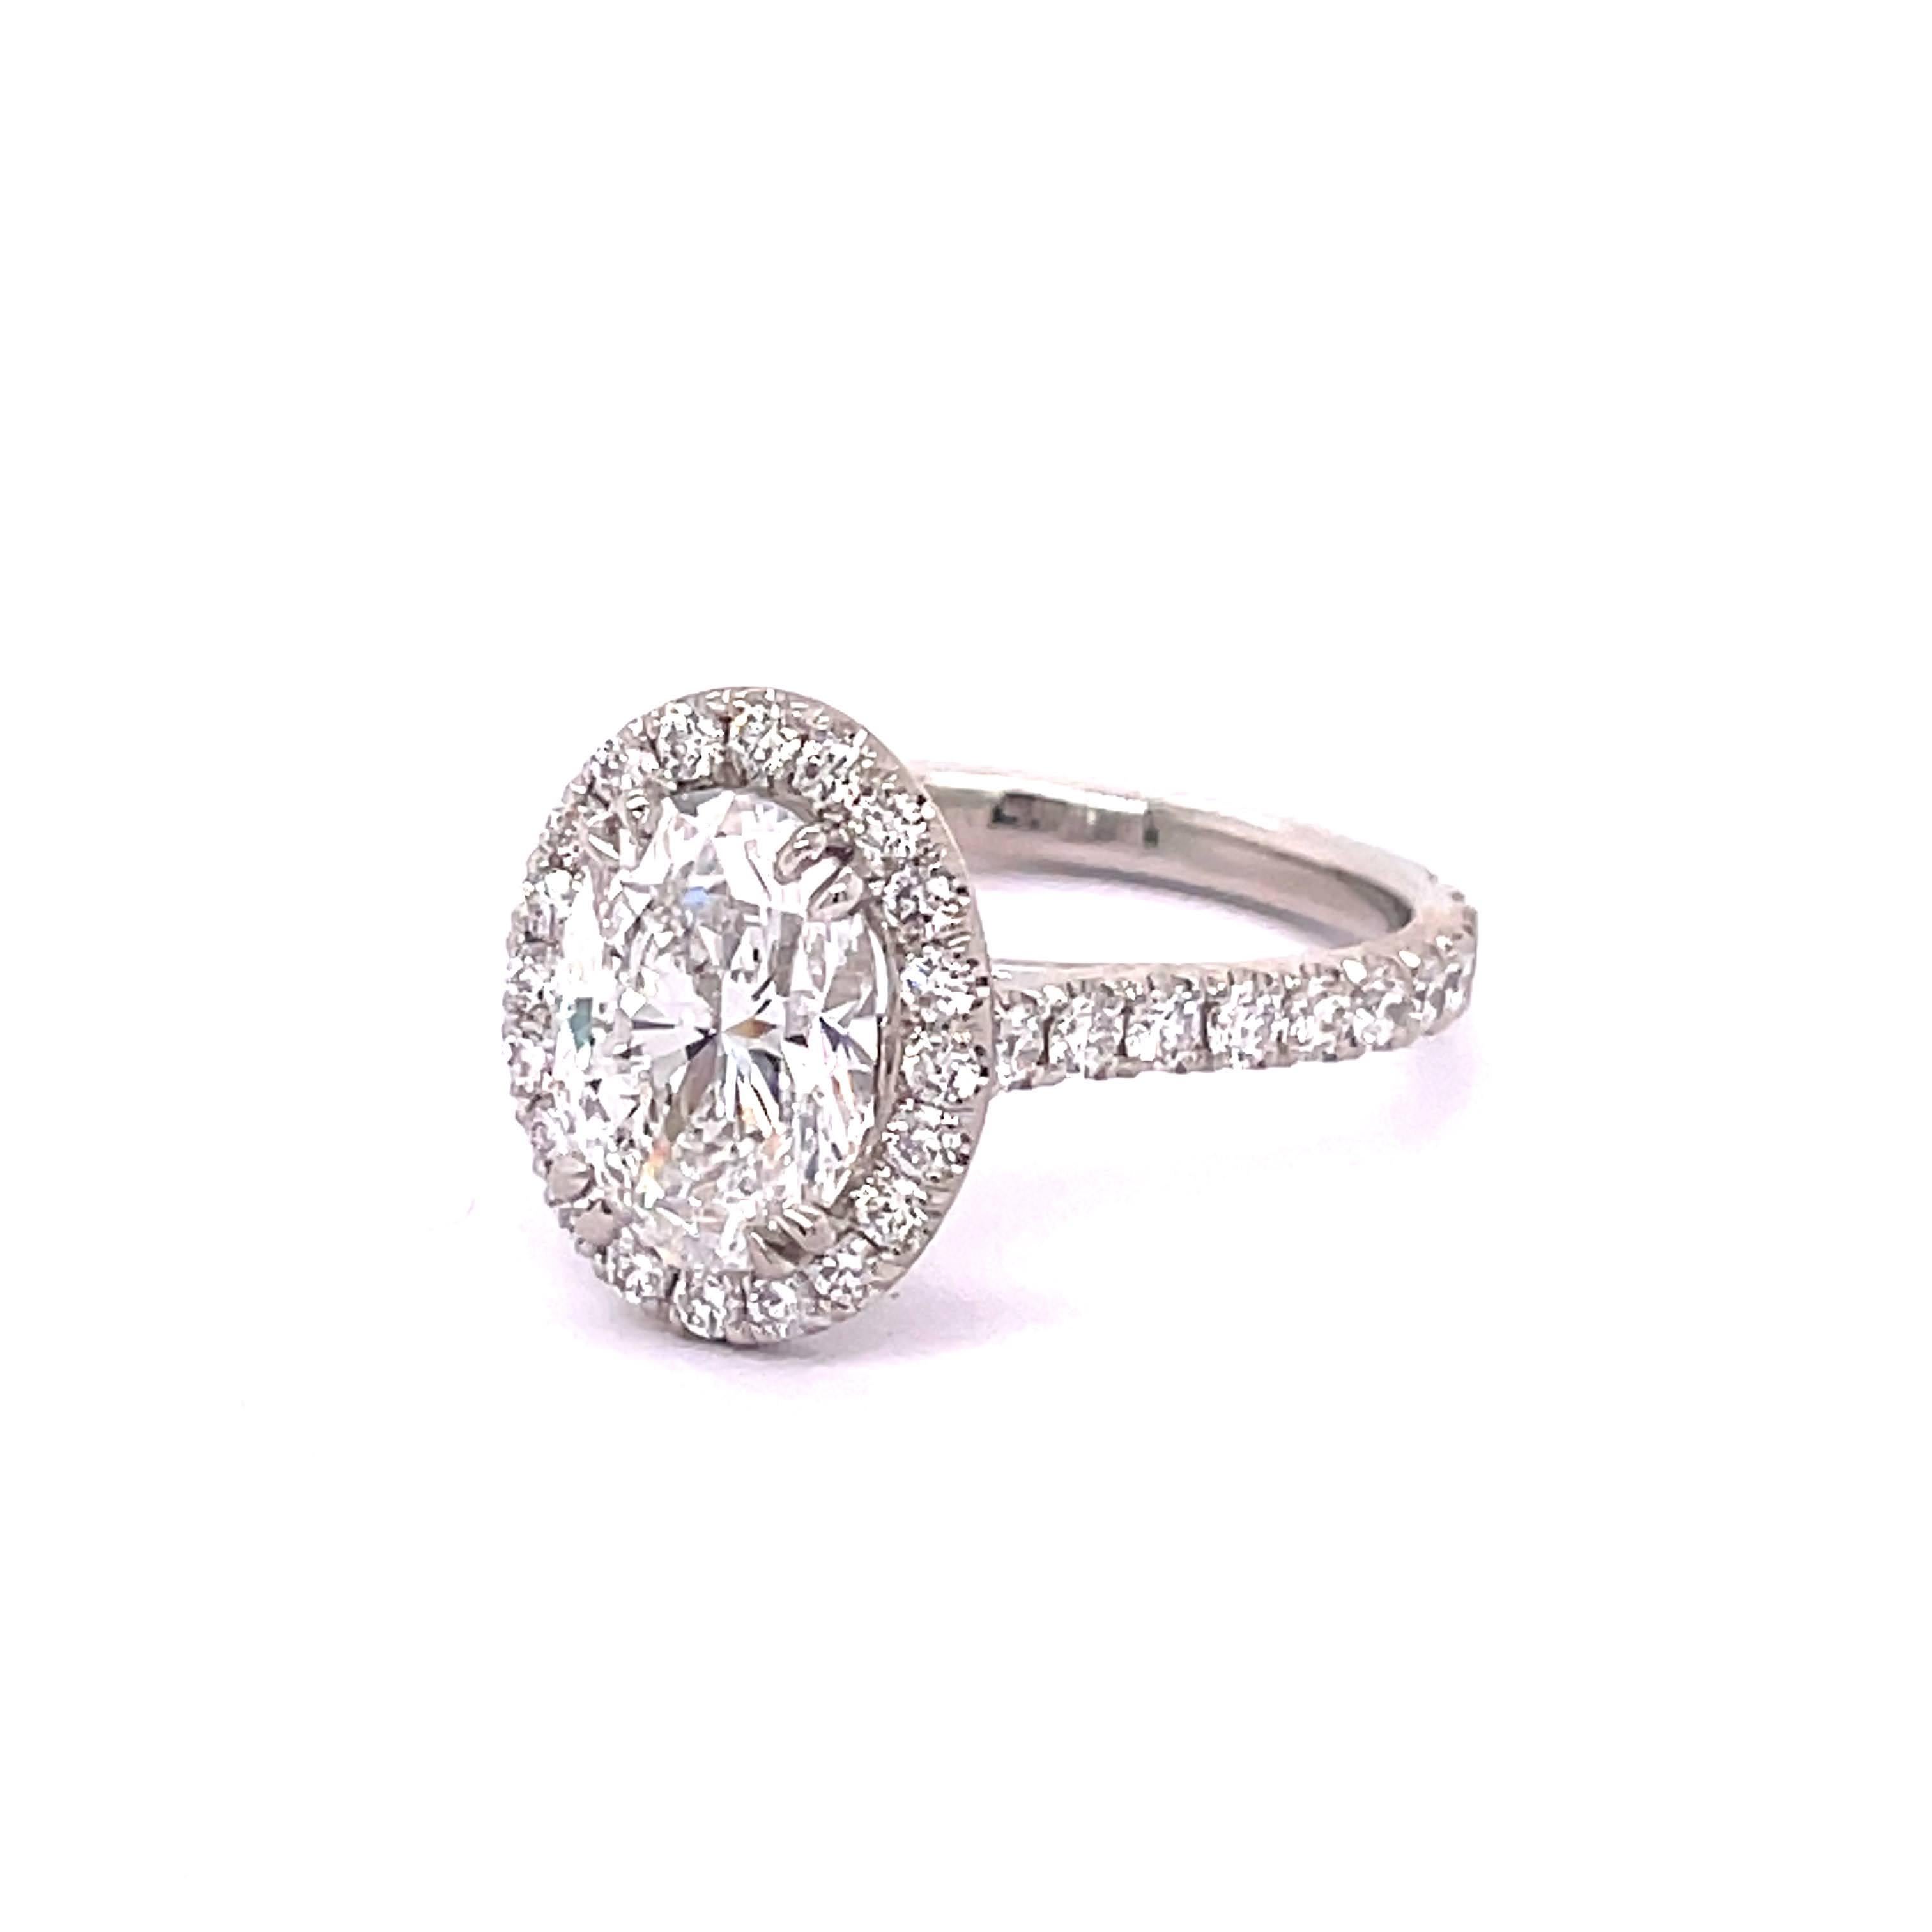 GIA Certified Oval Shape Diamond 2.20, D Color SI1 Clarity mounted elegantly on a Platinum setting filled with 0.94 round diamonds on its halo and shank making it even more special. A ring made to its perfection.
